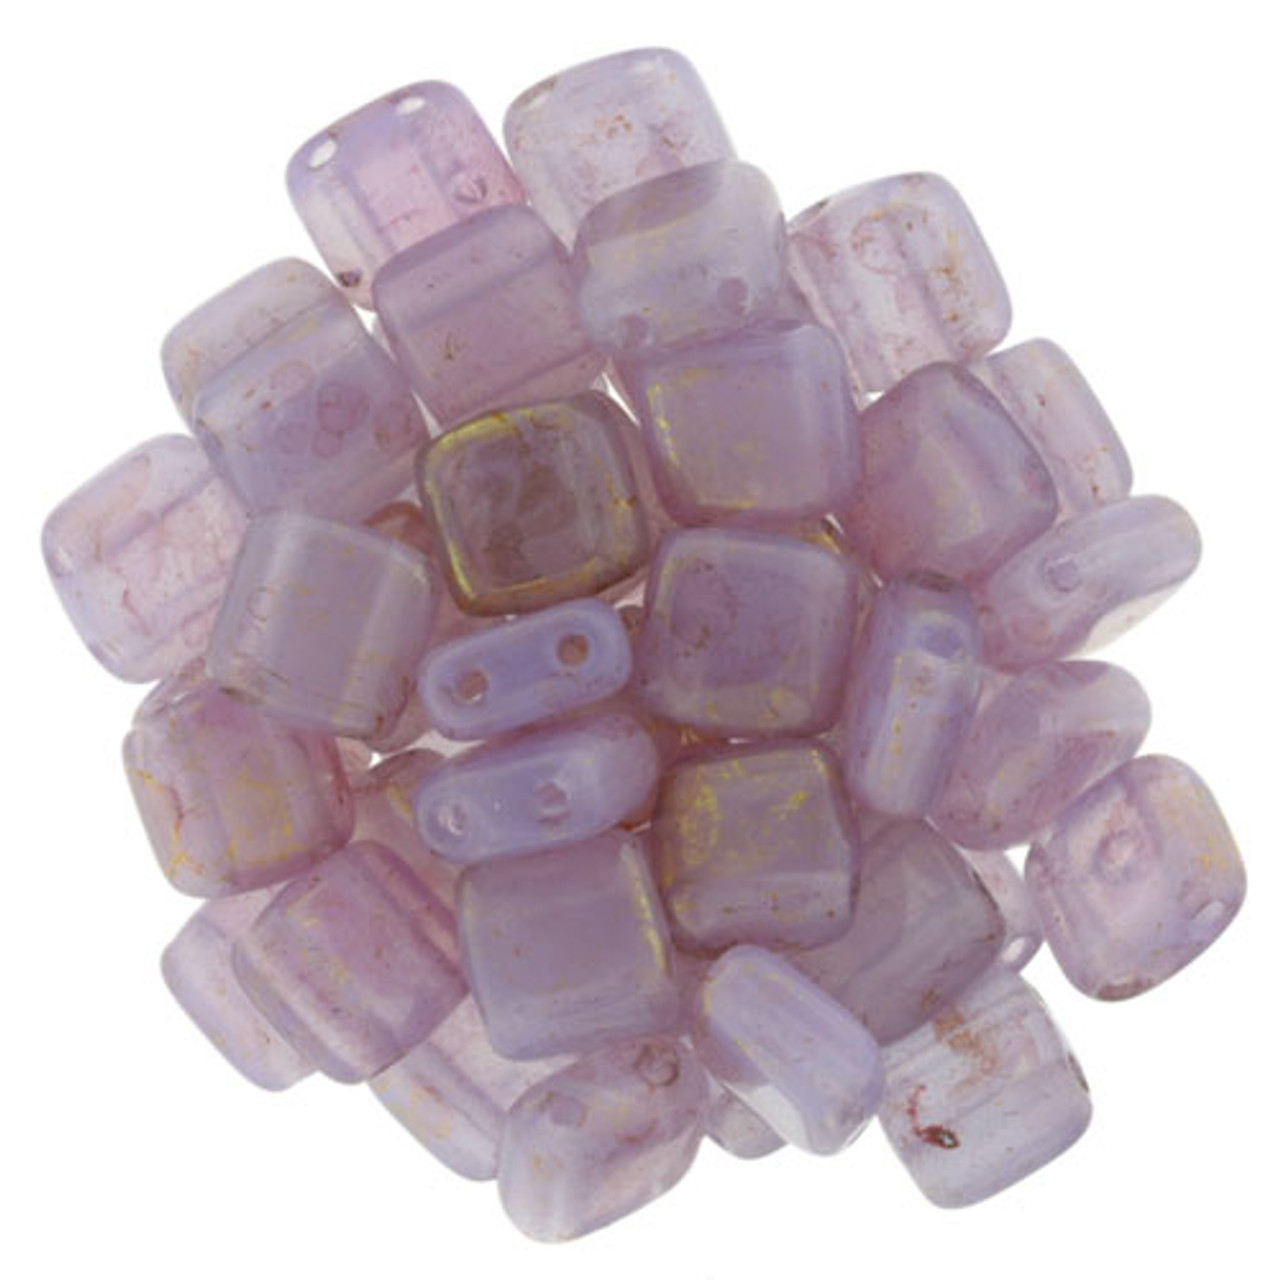 50 CzechMates 6mm Two Hole Tile Beads Milky Turquoise Pink Topaz Luste